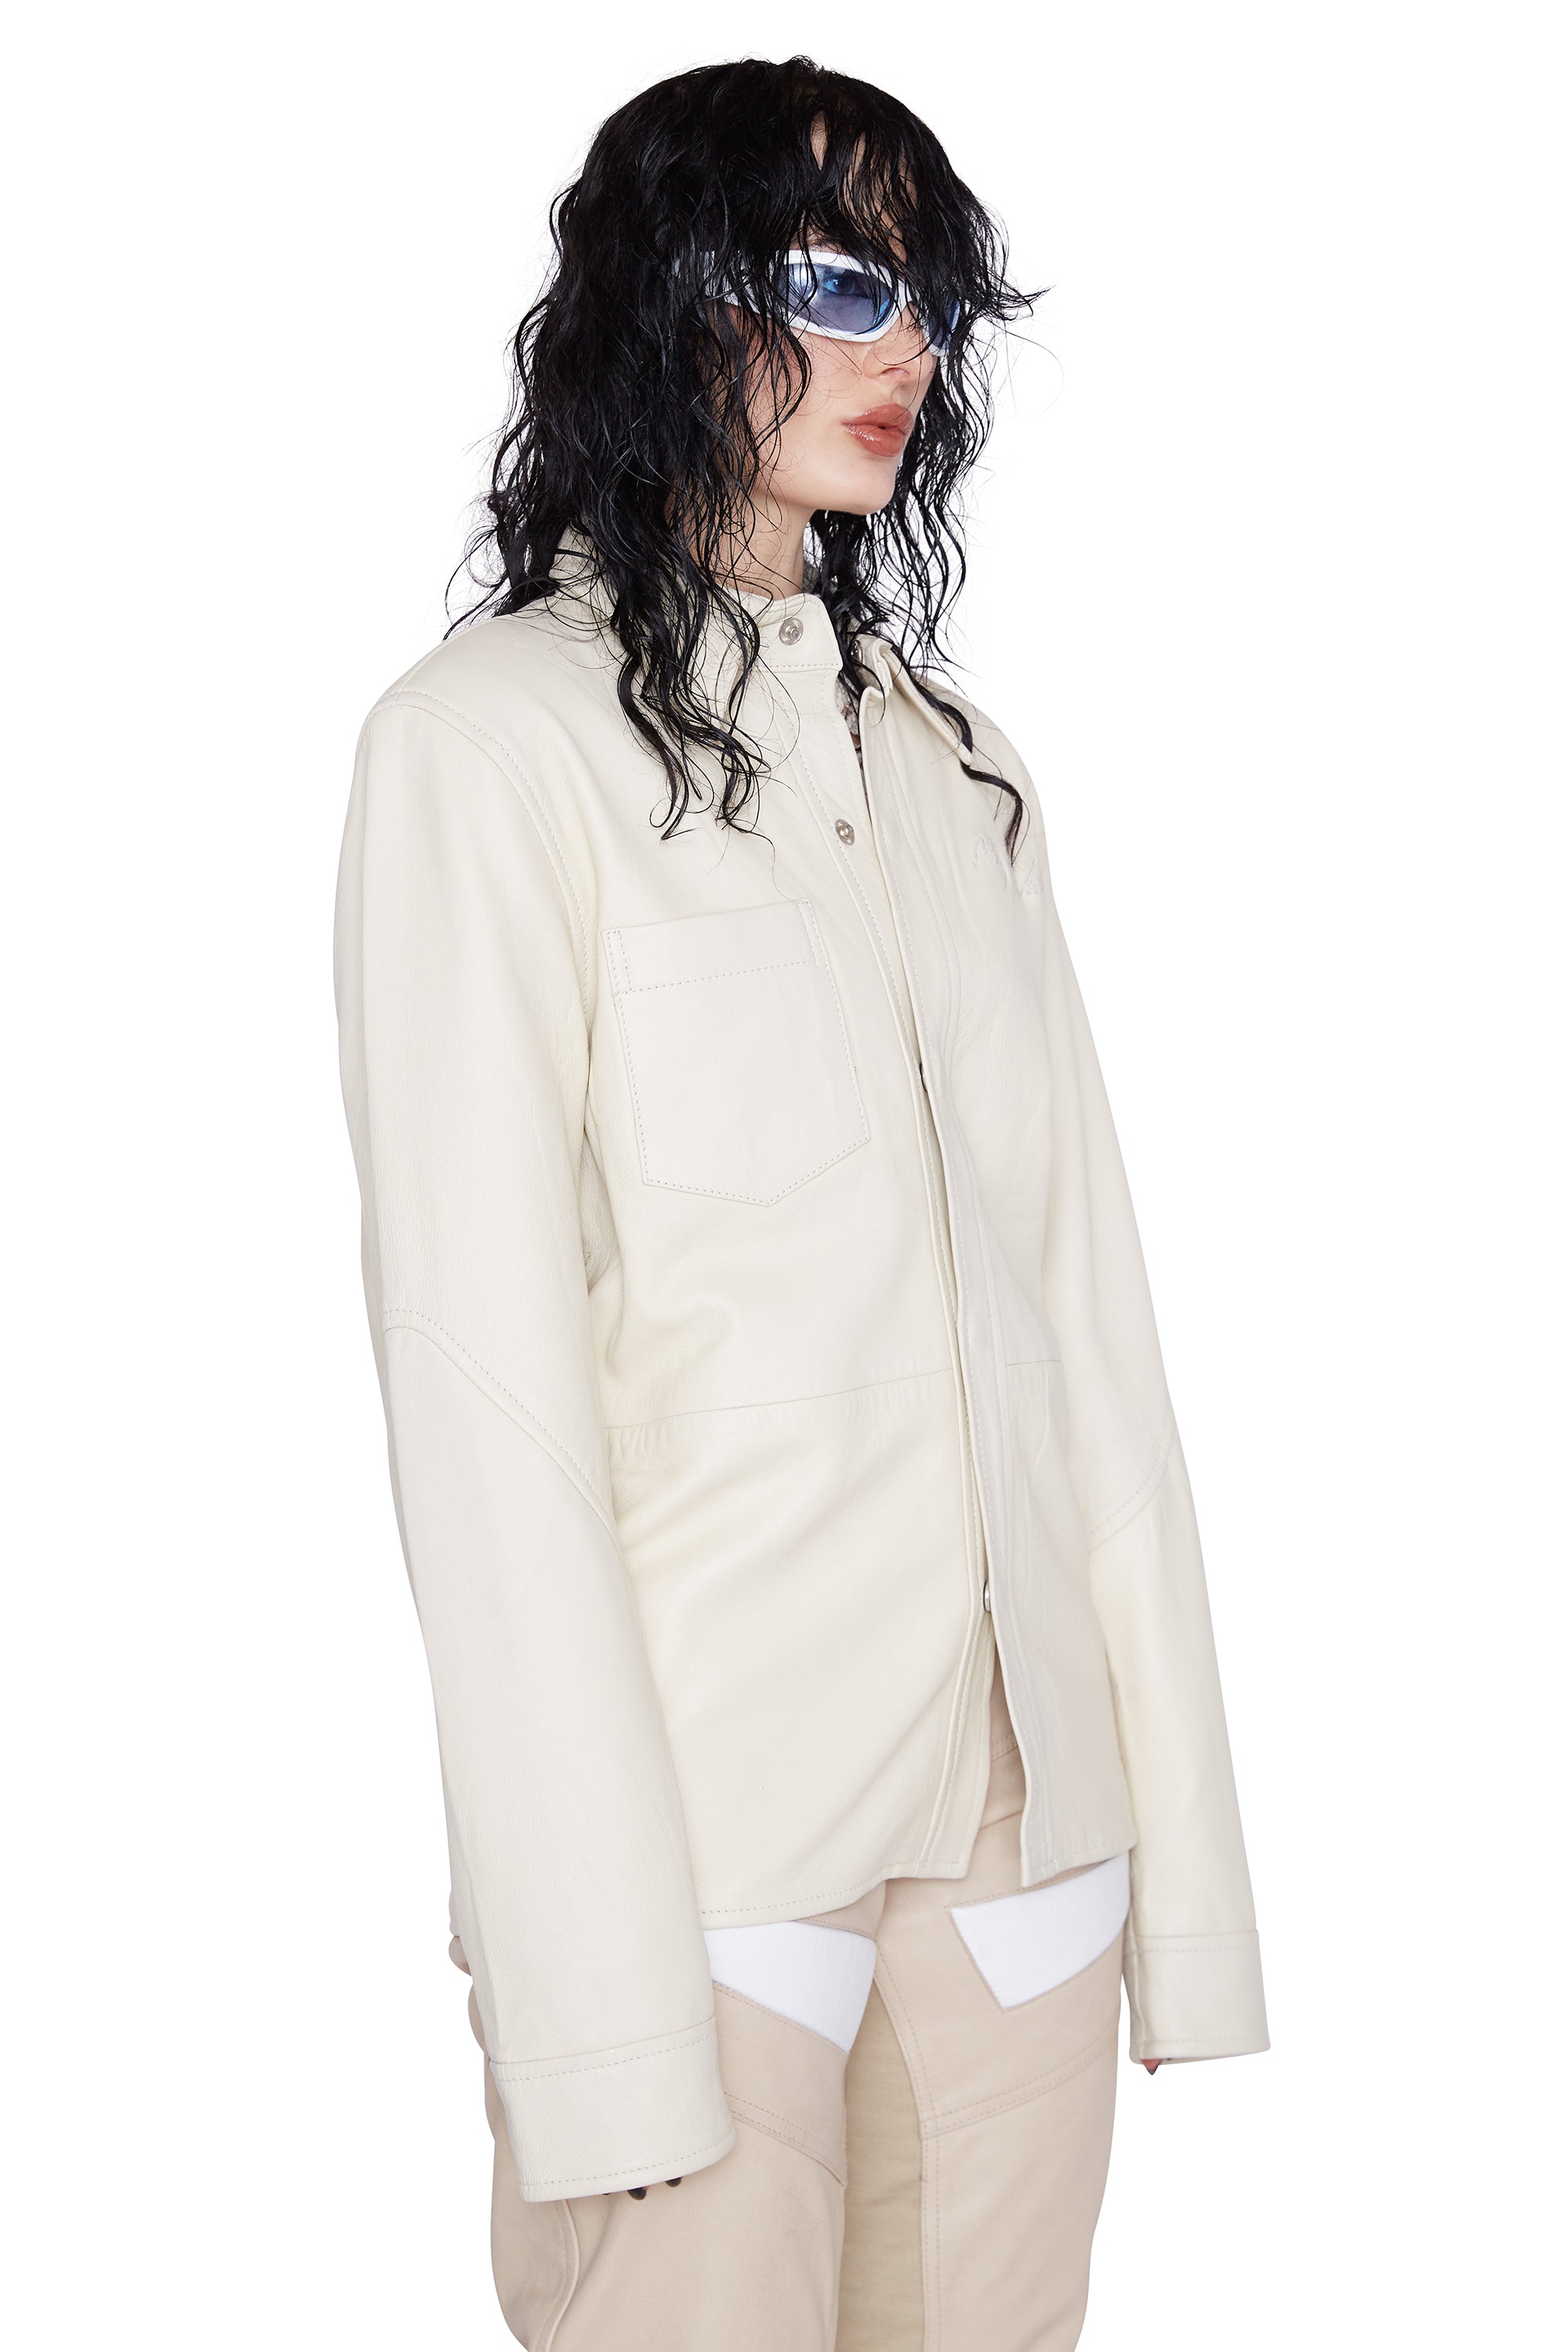 Crescent Embossed Leather Shirt (Dune)